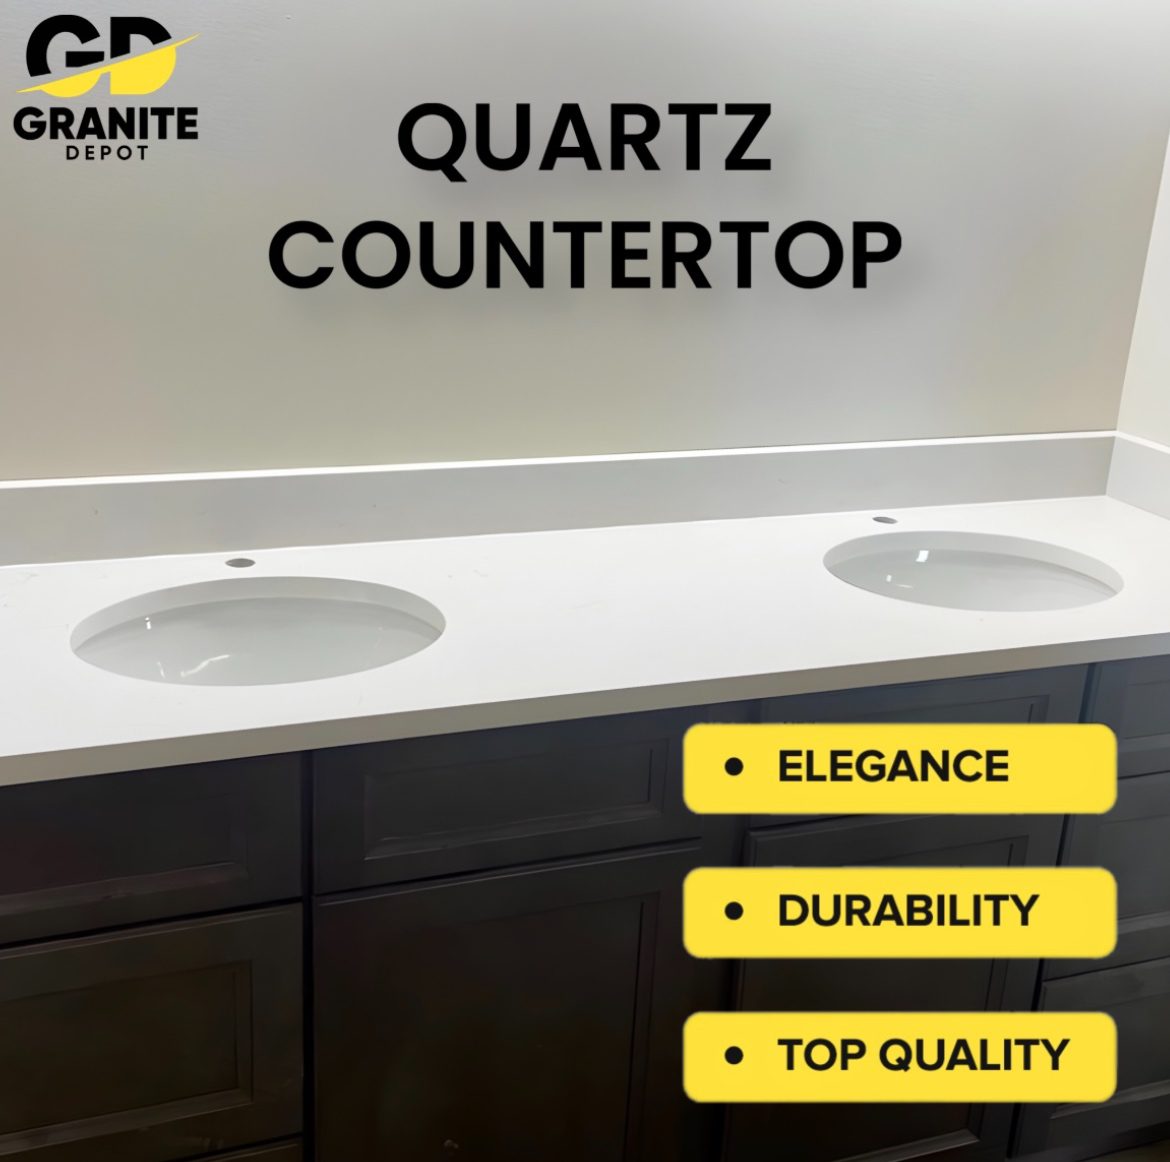 Efficient Quartz Fabrication Services from Granite Depot: Get Your Countertops Fast!